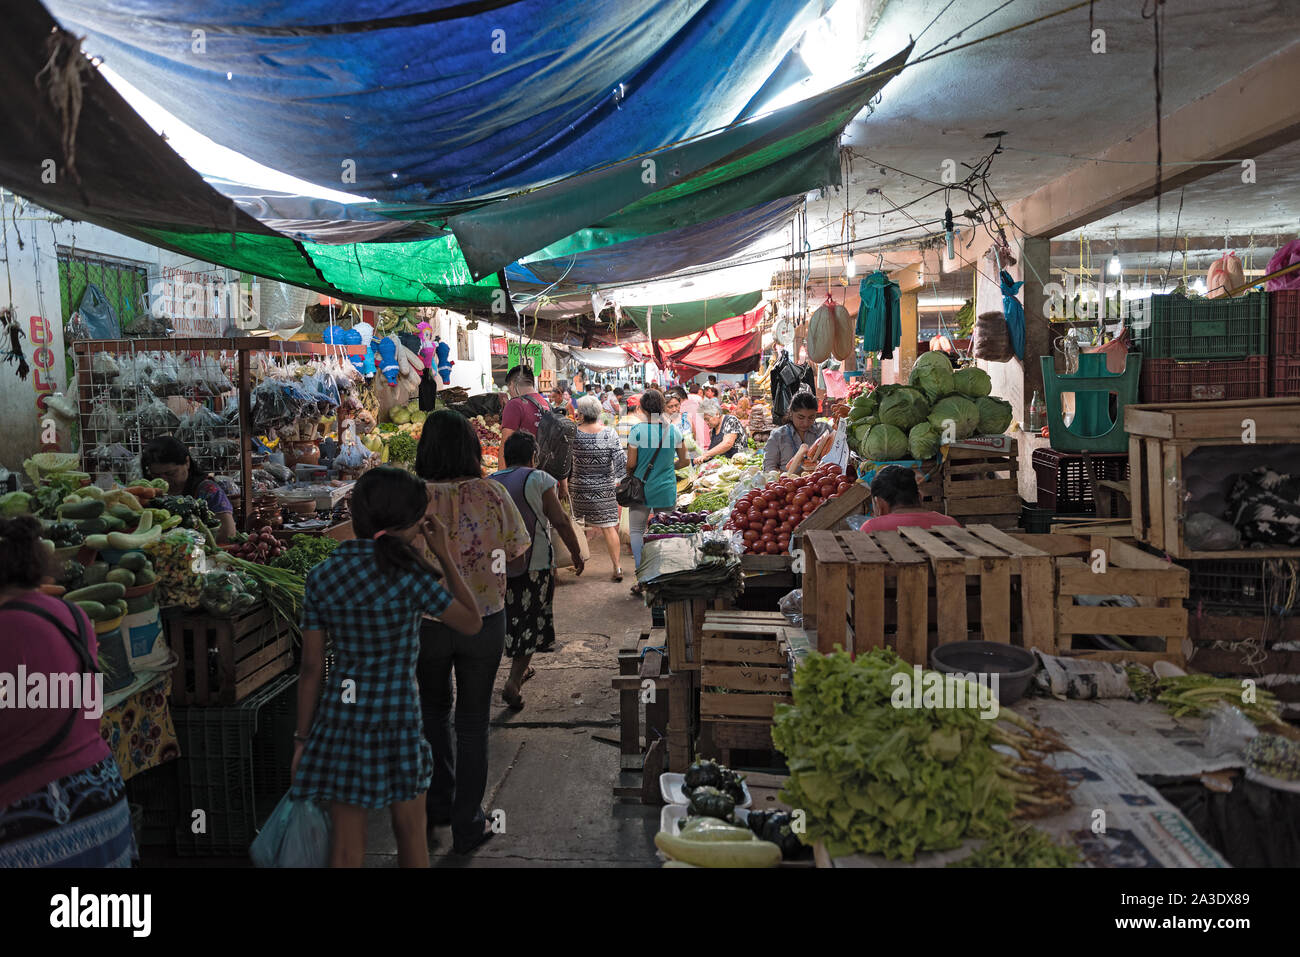 fruit and vegetable stalls in the market hall of campeche mexico Stock Photo